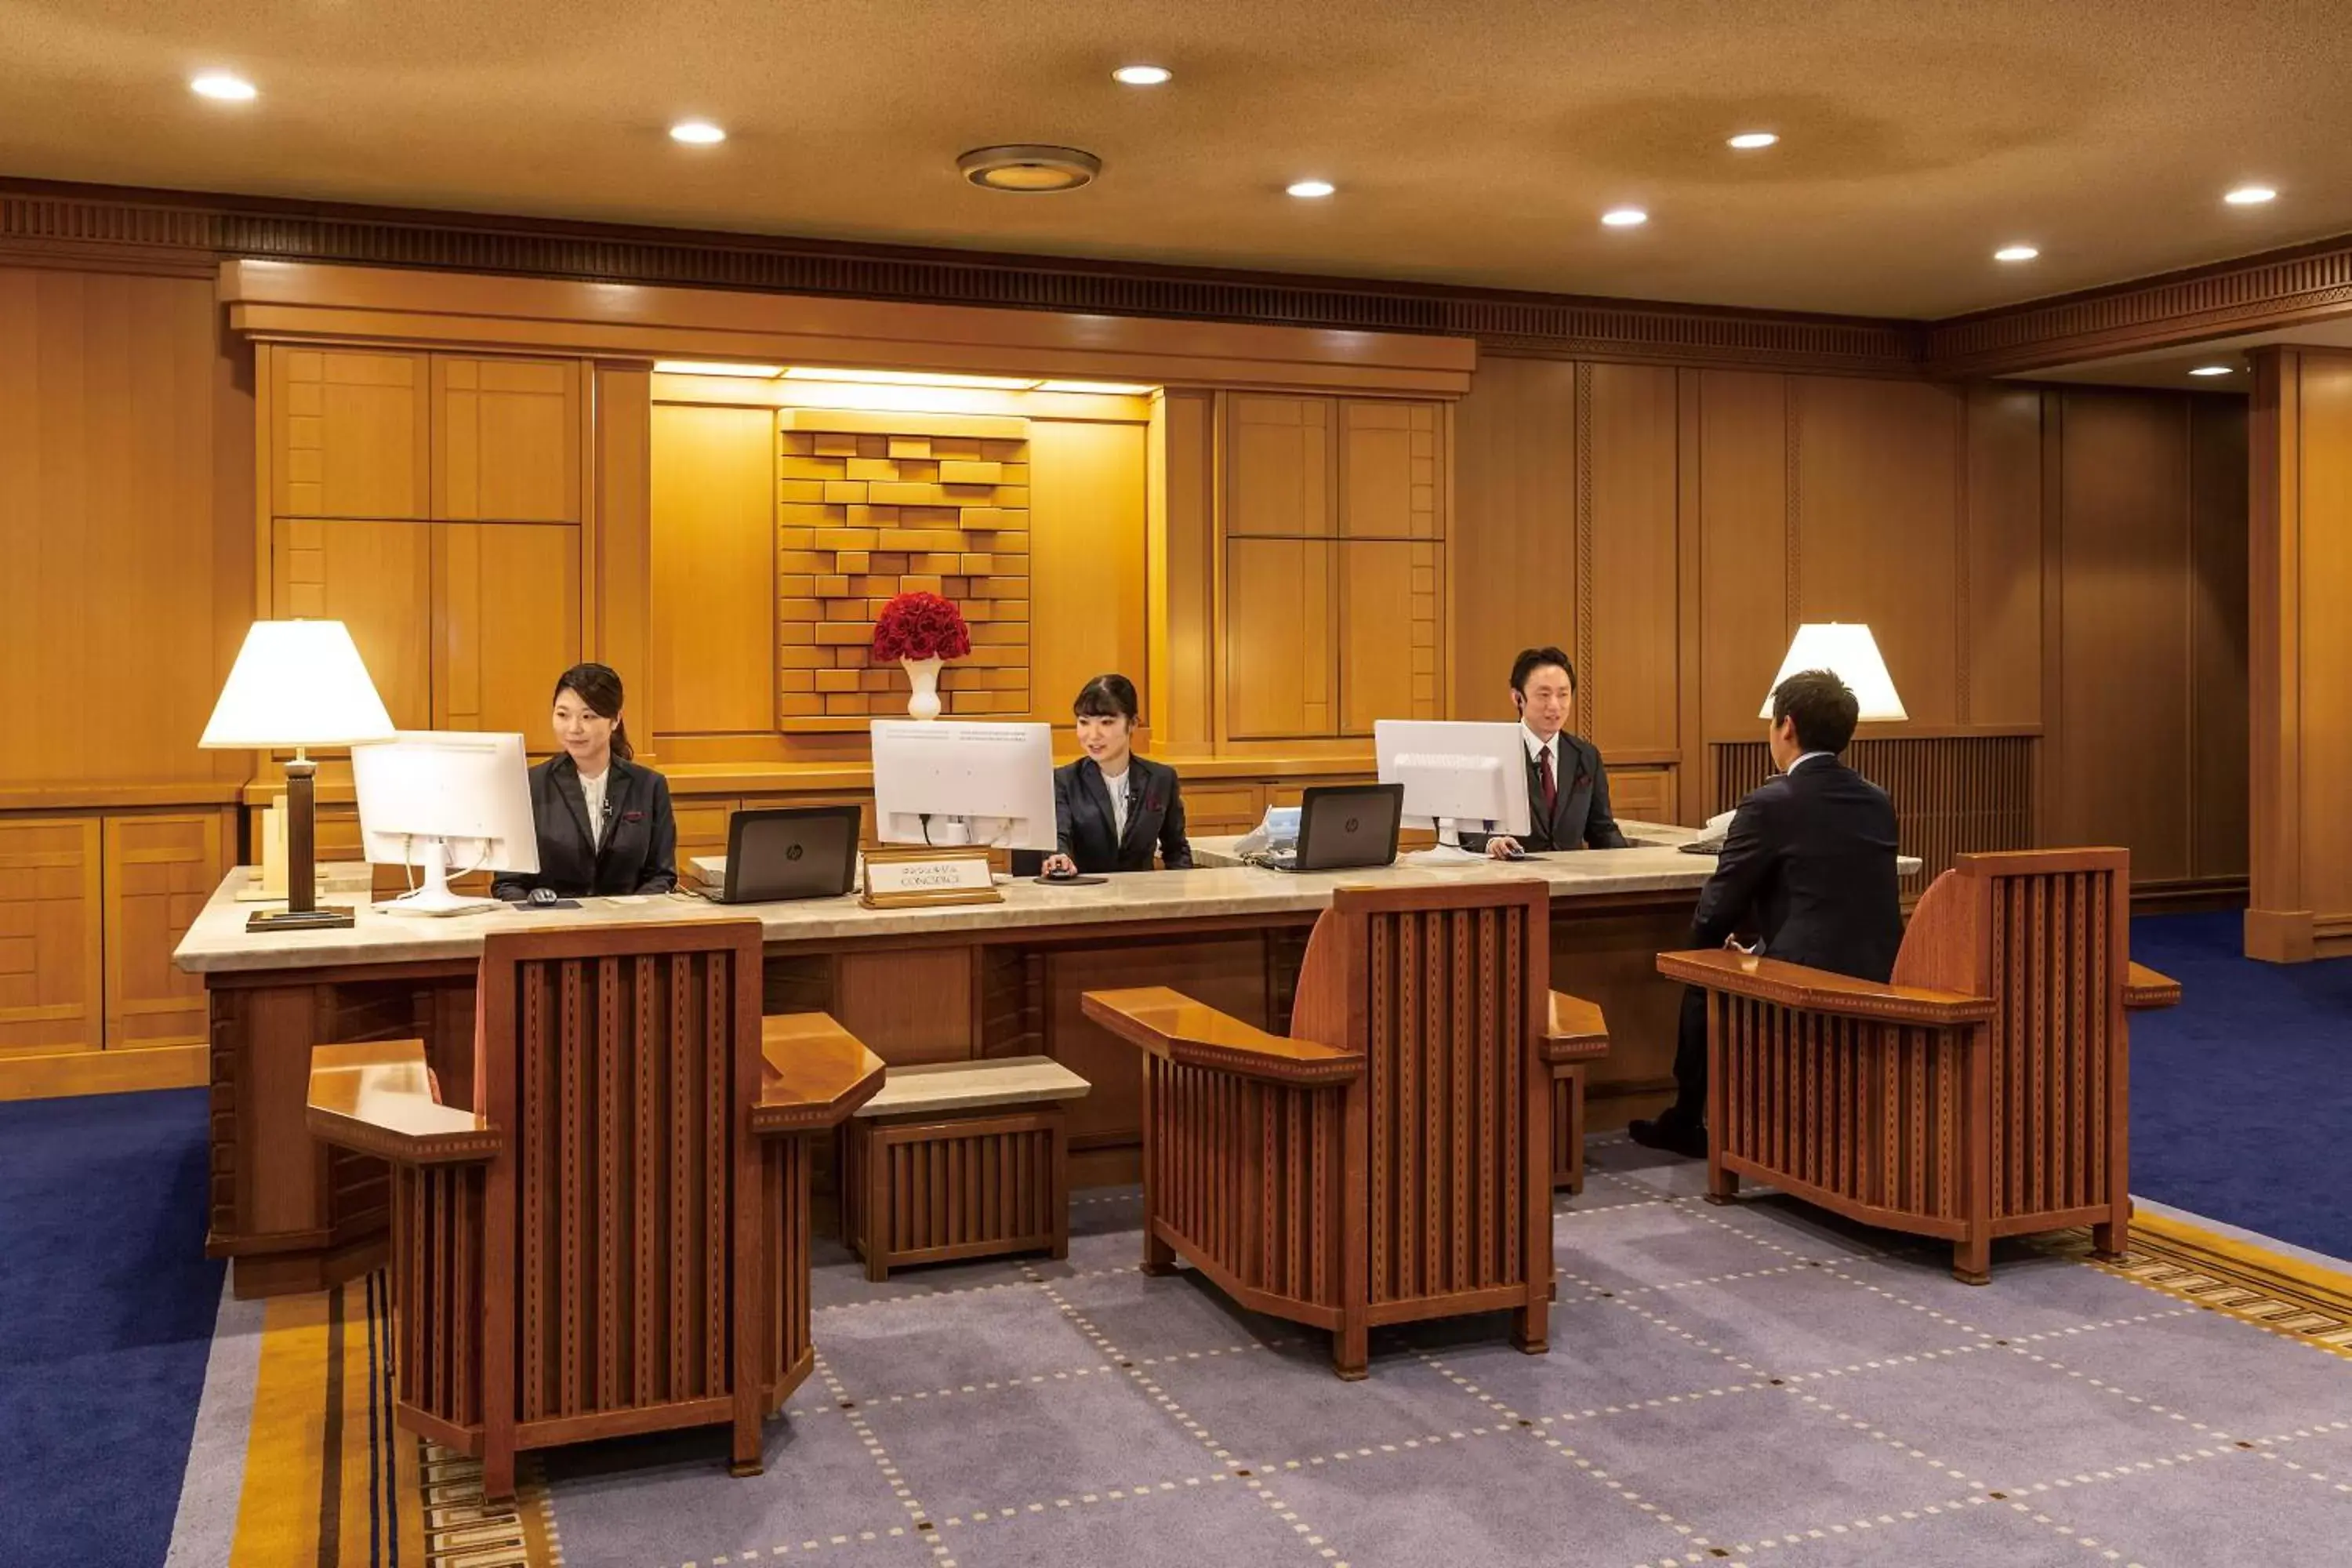 Staff in Imperial Hotel Tokyo